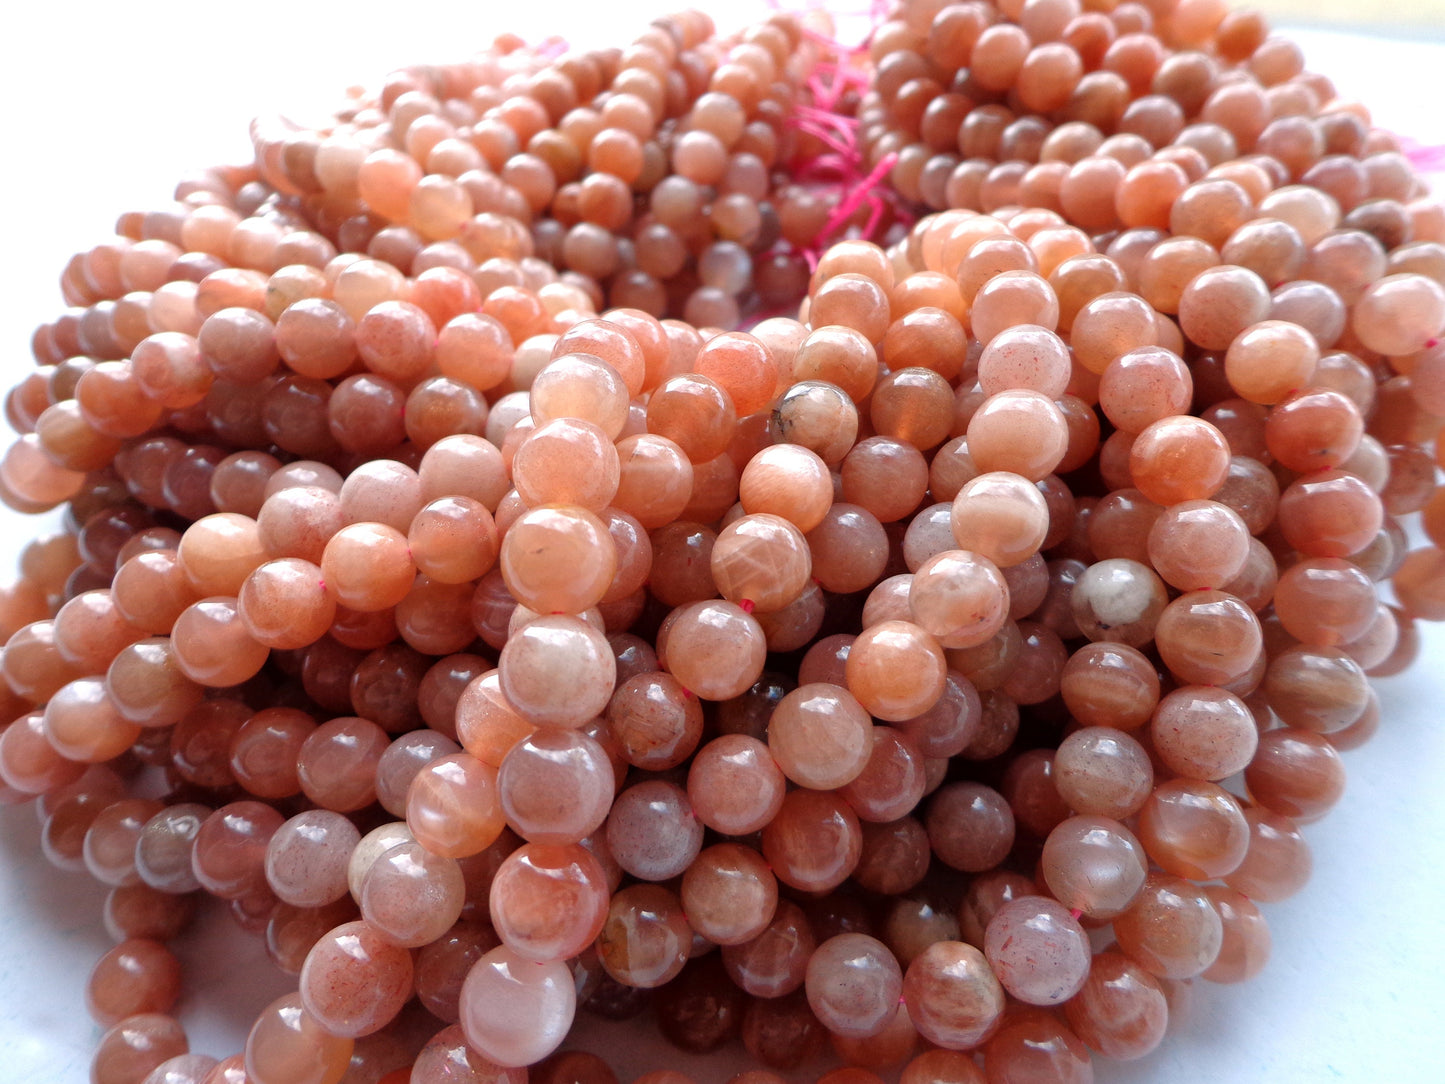 AAA Natural Sunstone Gemstone Beads 8mm 10mm 12mm Smooth Round Shape Beads, Beautiful Peach Color Great Quality Bead! Full length 15.5"